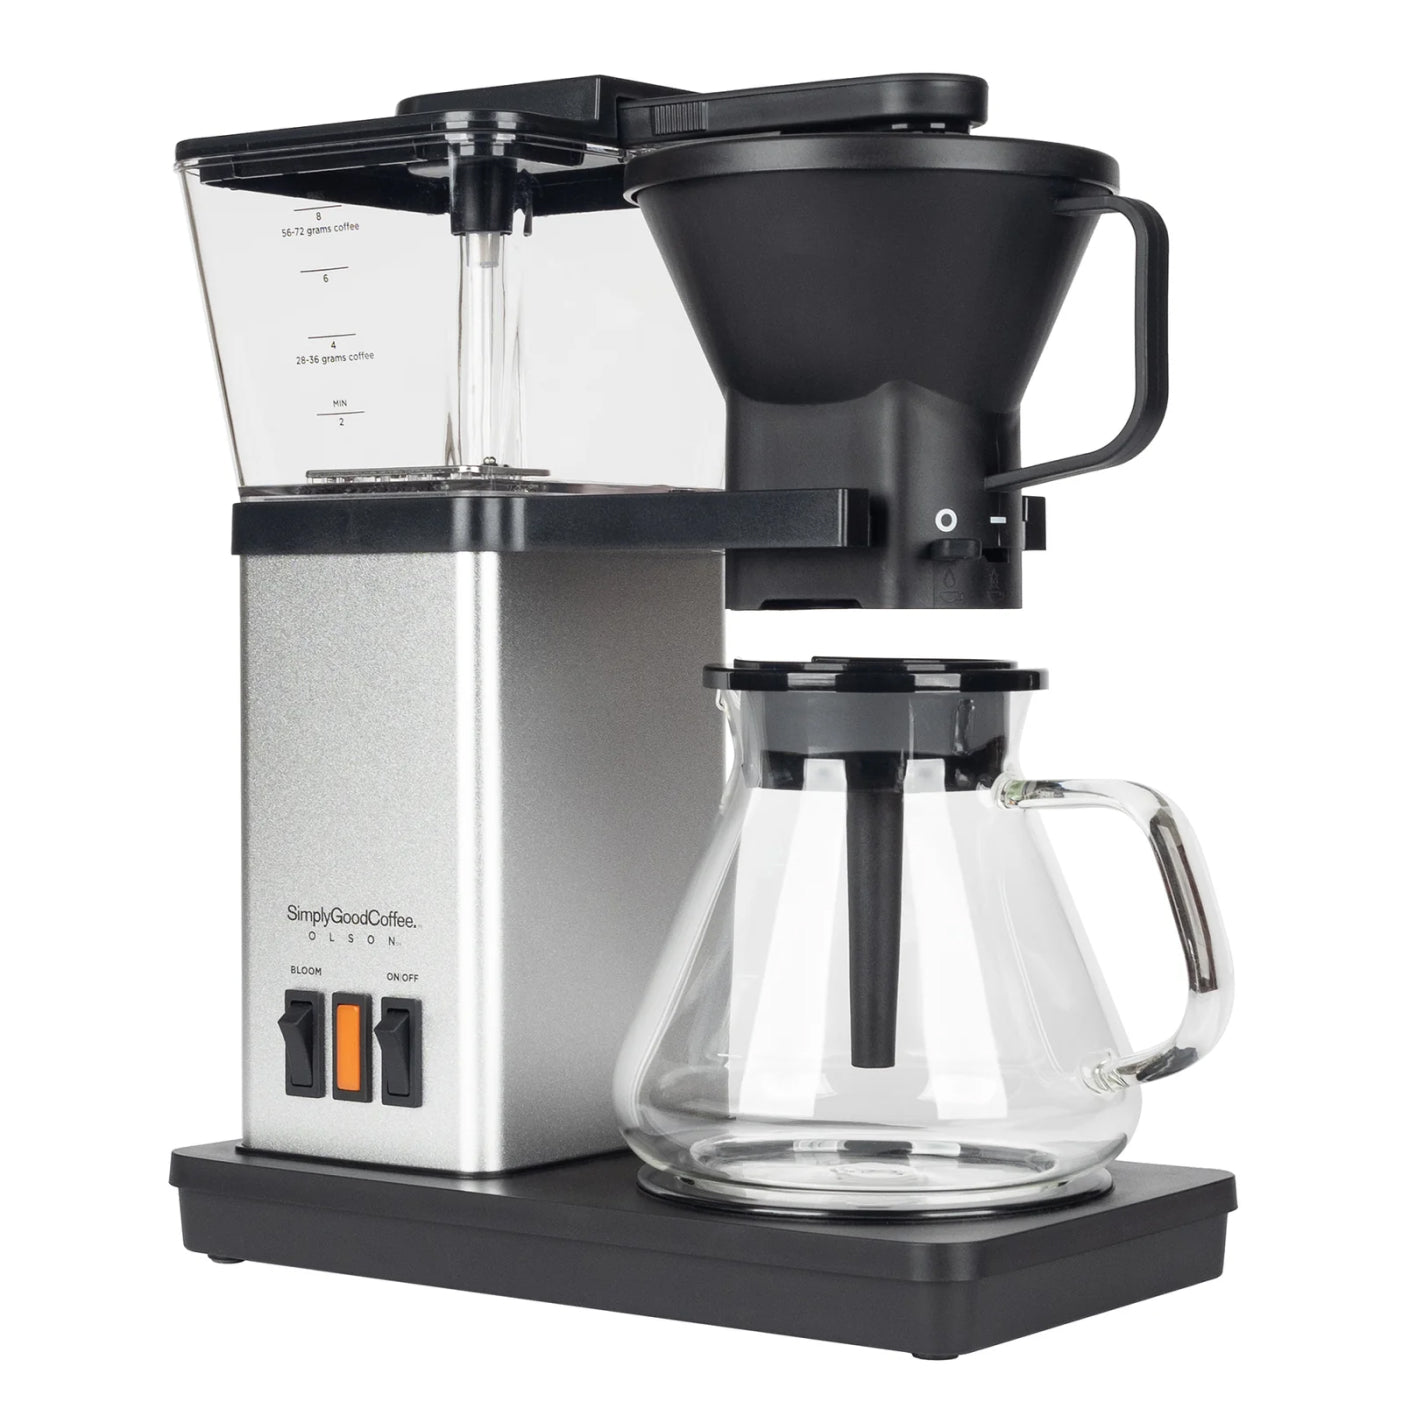 Brim Coffee Maker Review - Is It Good Quality?